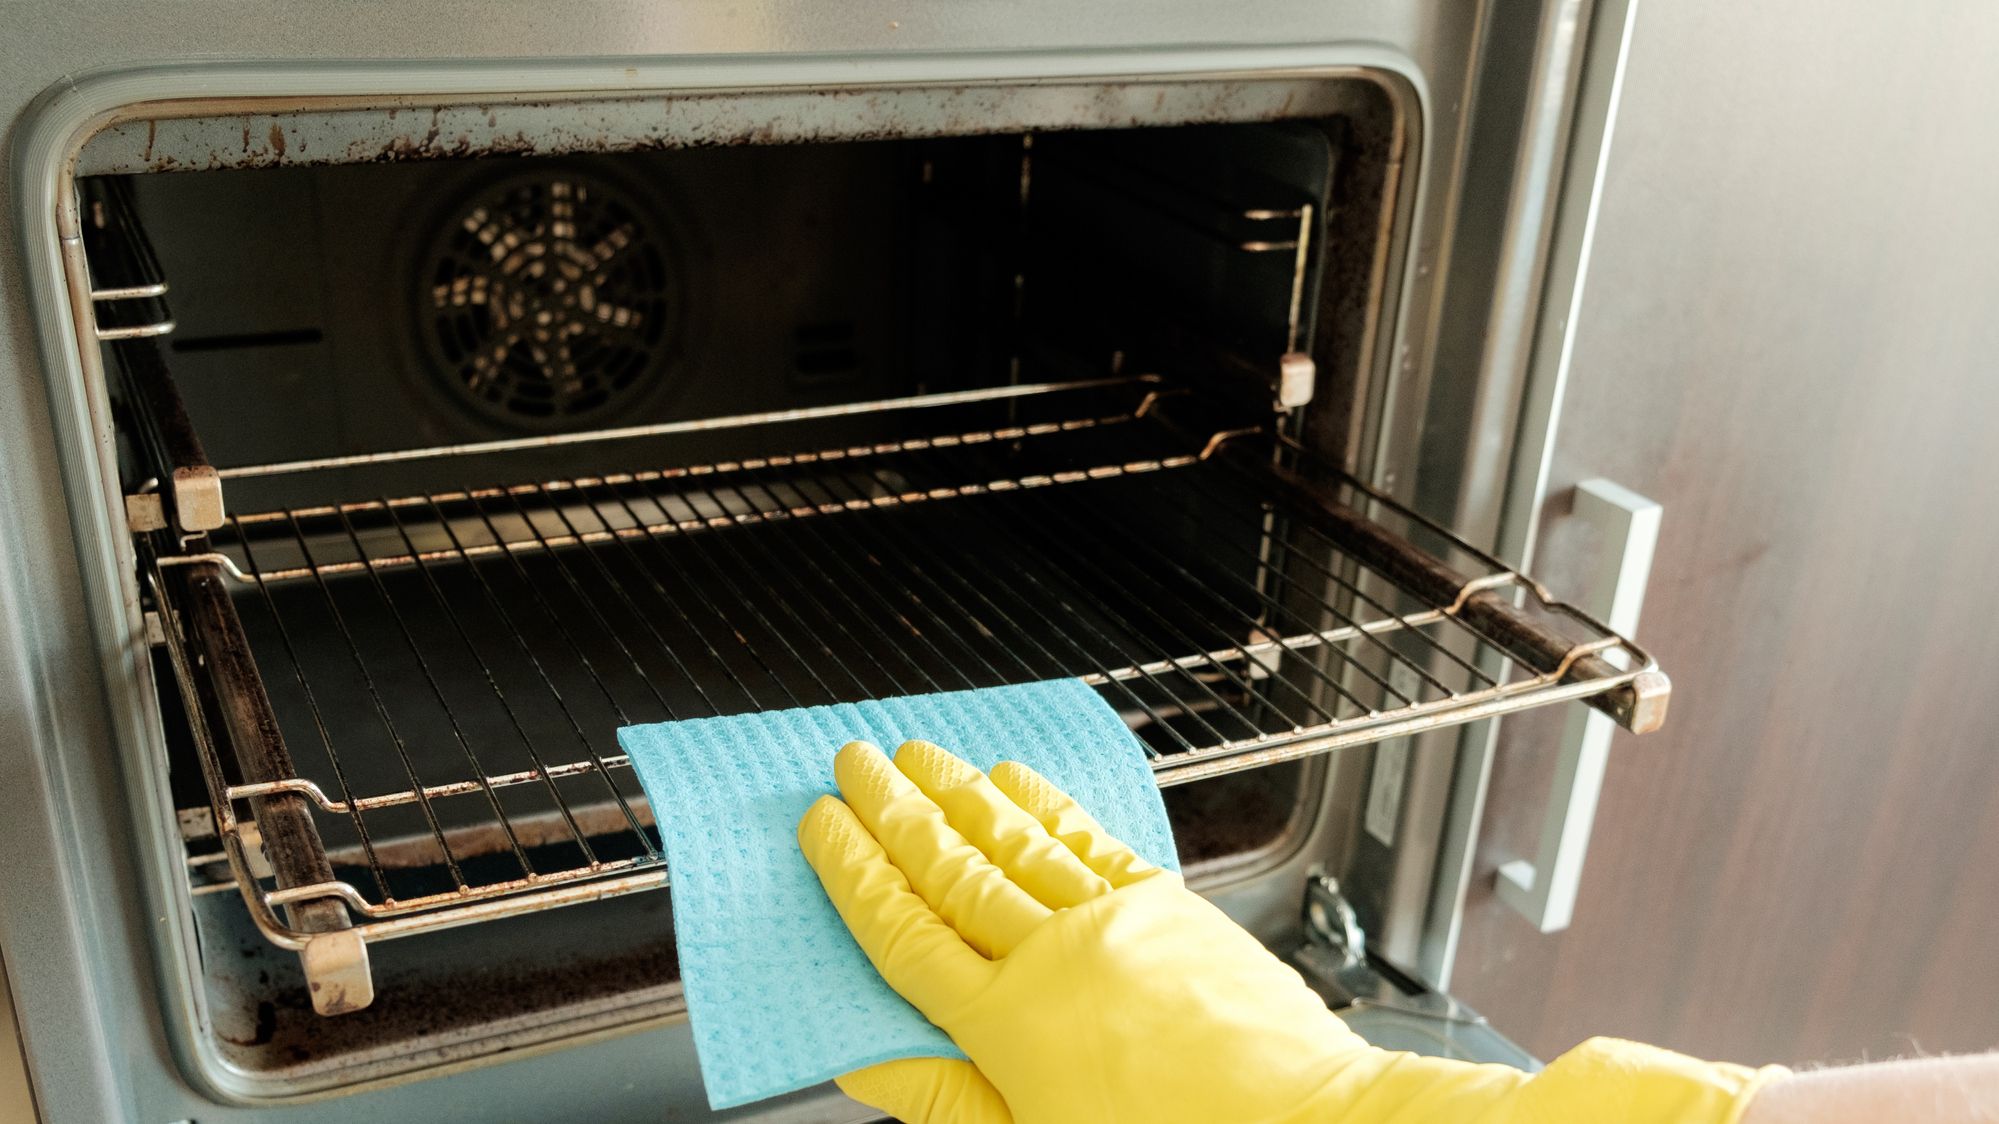 I cleaned my oven door in two minutes using Elbow Grease's cheap